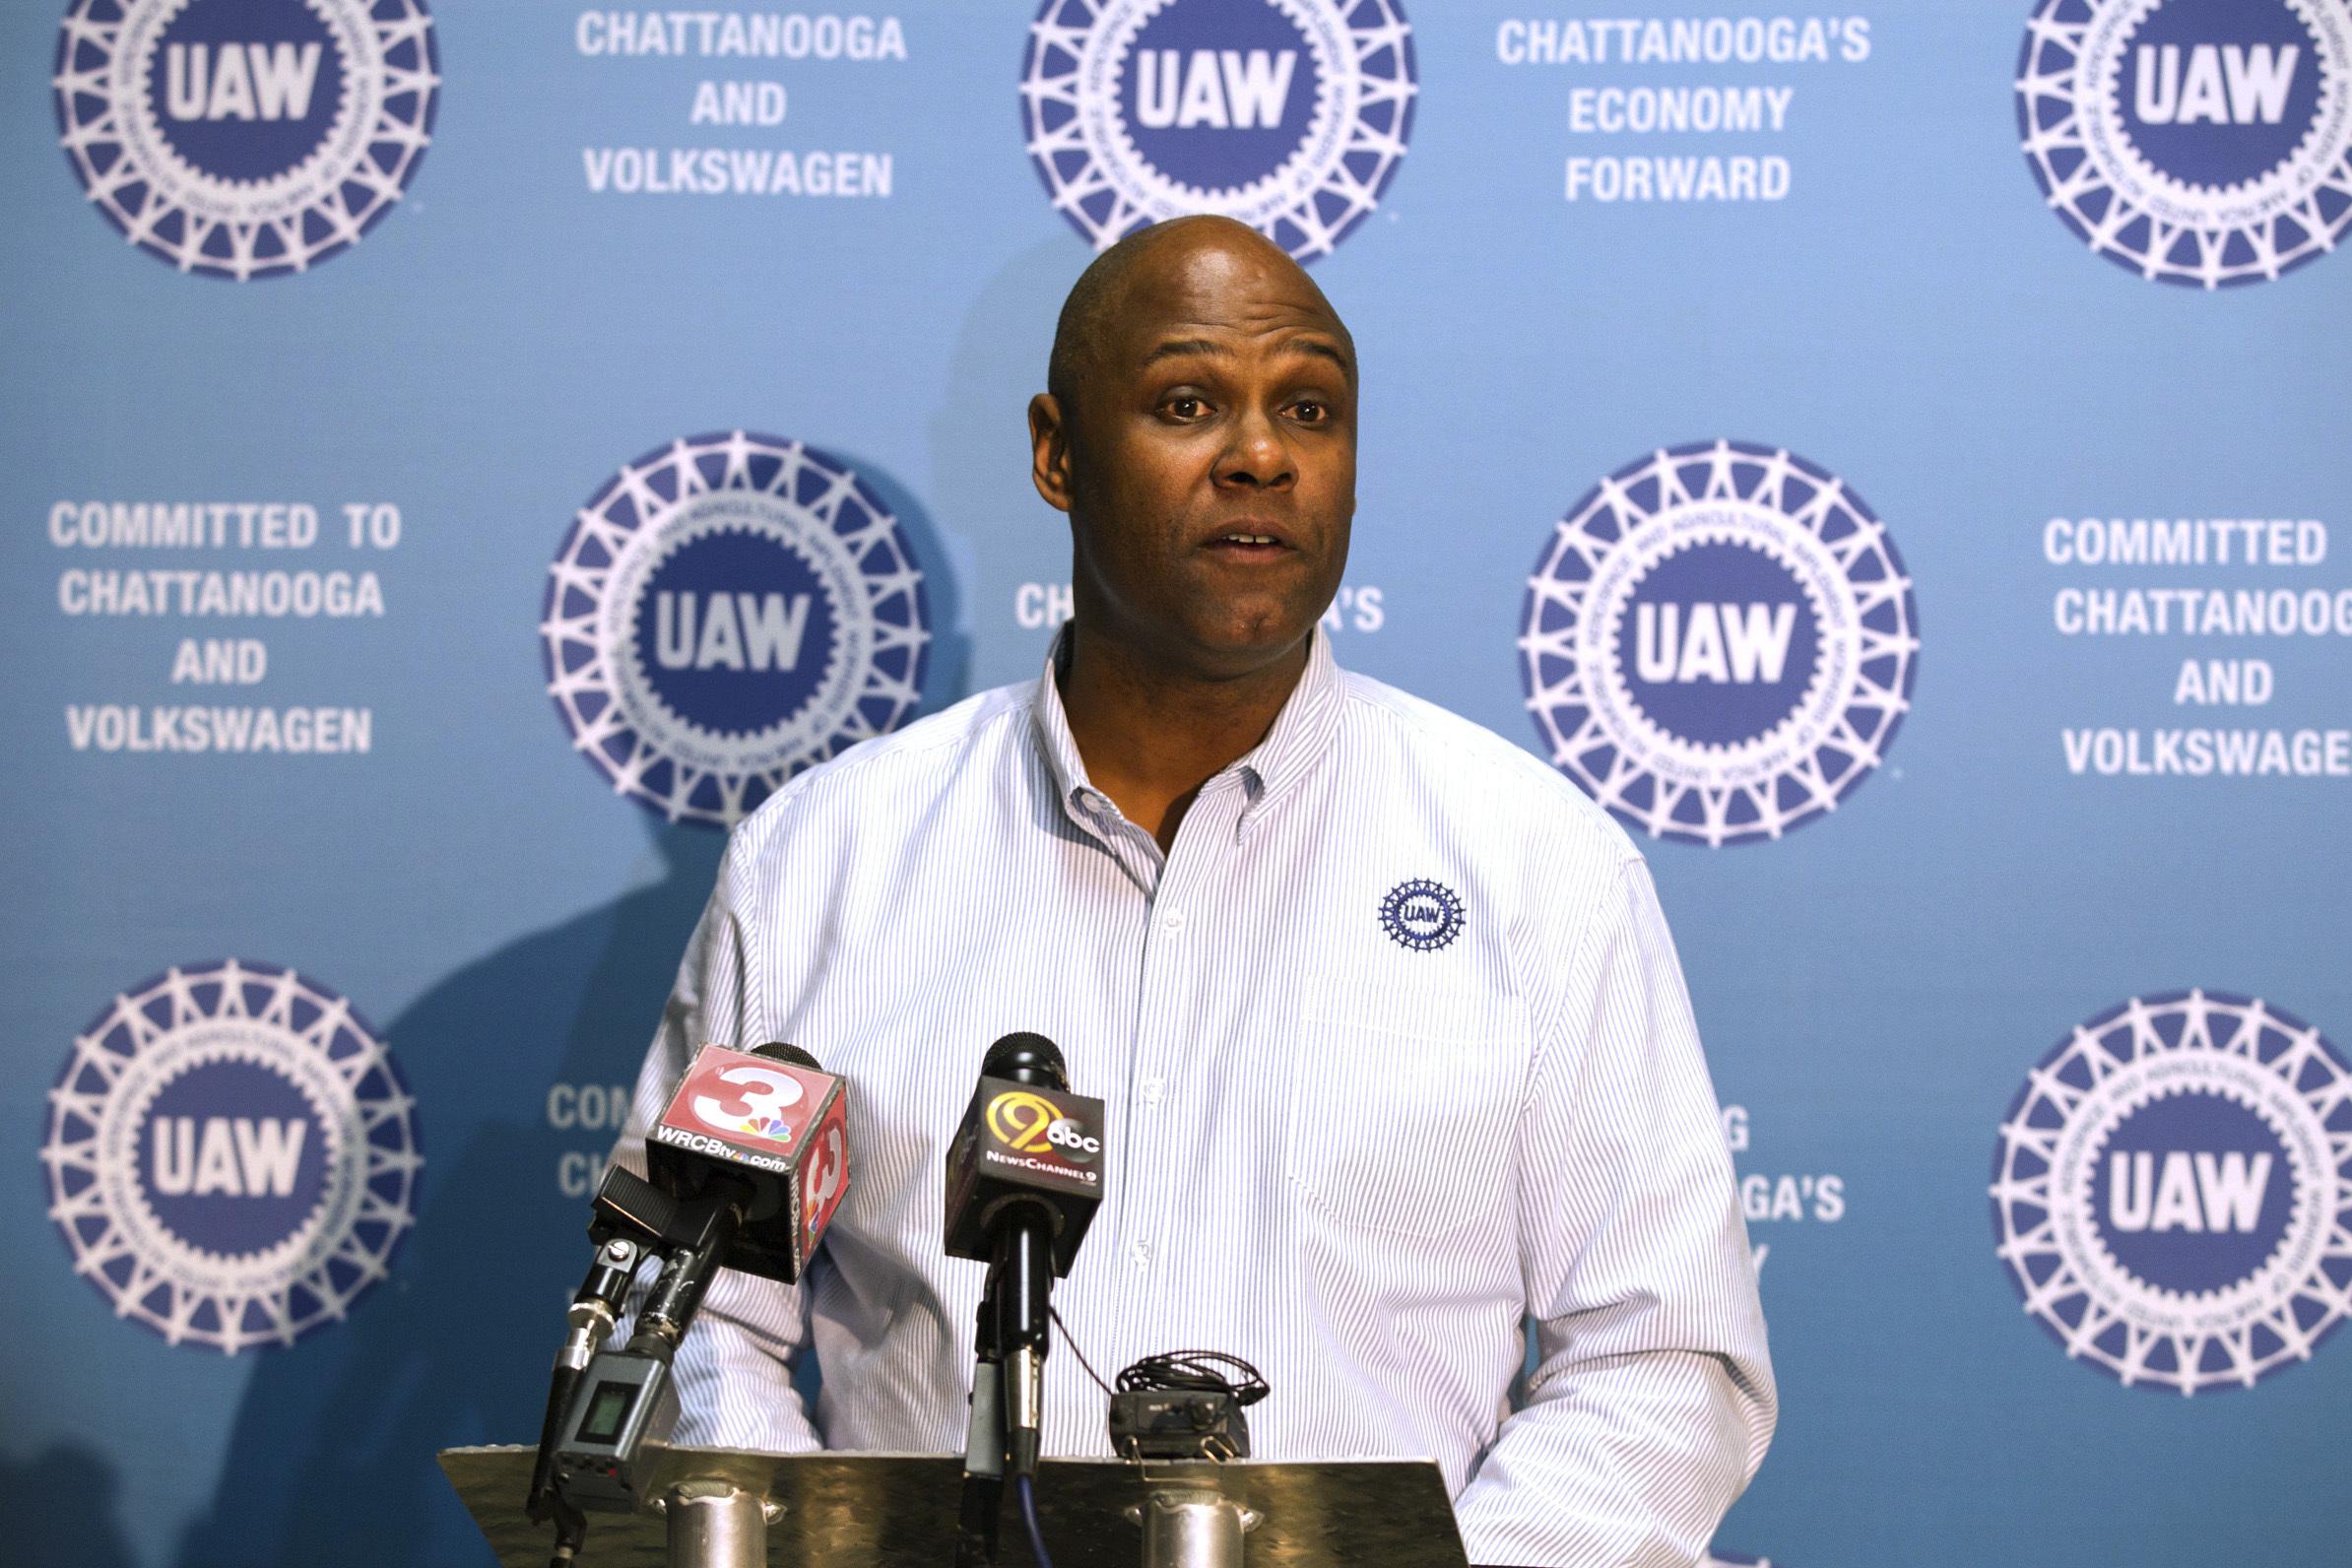 New UAW president will face huge postpandemic challenges AP News